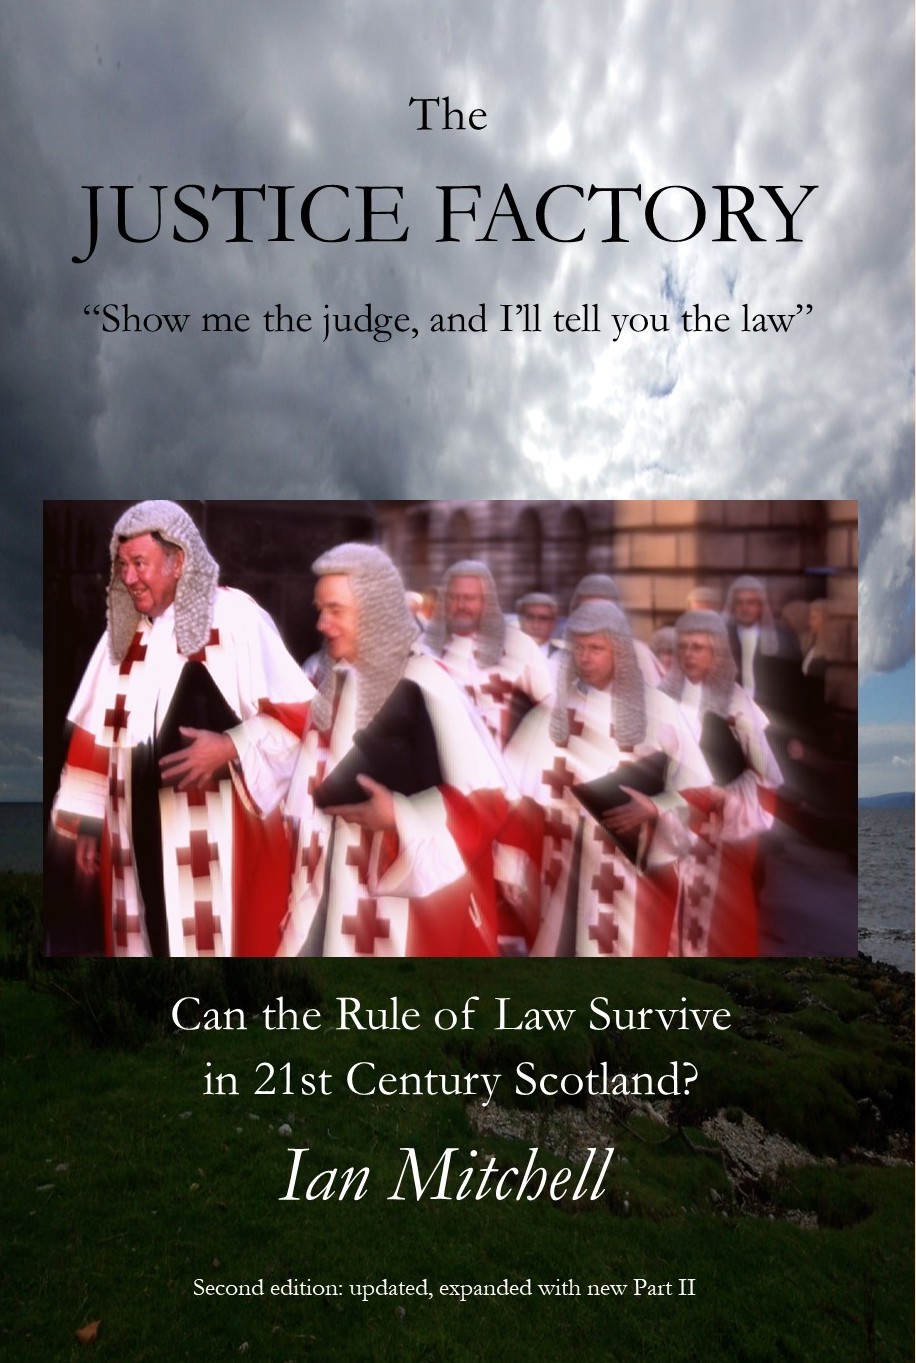 Scots in thrall to nationalist elite, new book argues